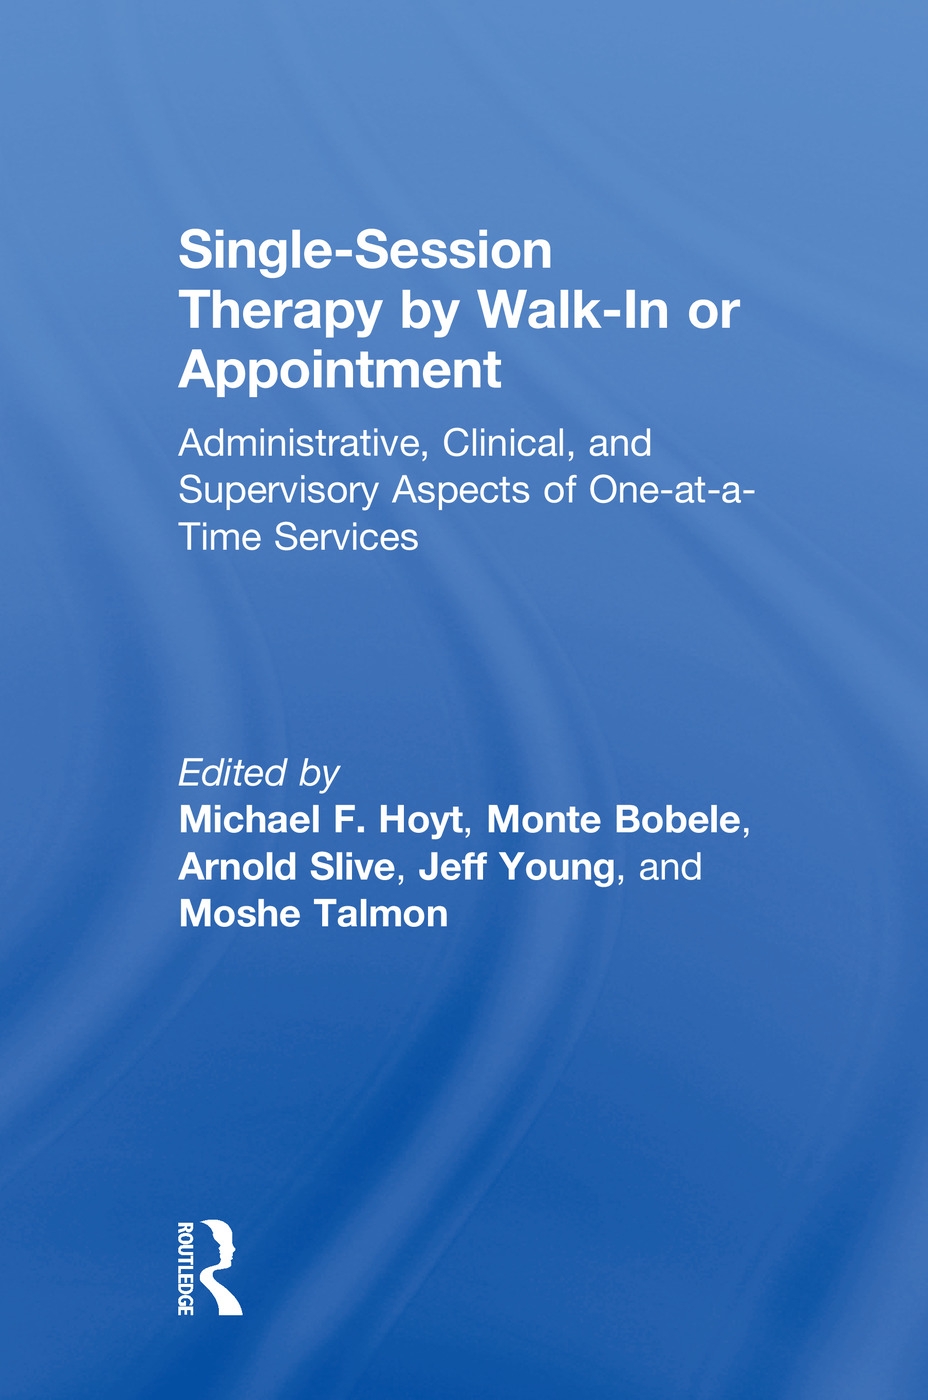 Single-Session Therapy by Walk-In or Appointment: Administrative, Clinical, and Supervisory Aspects of One-At-A-Time Services